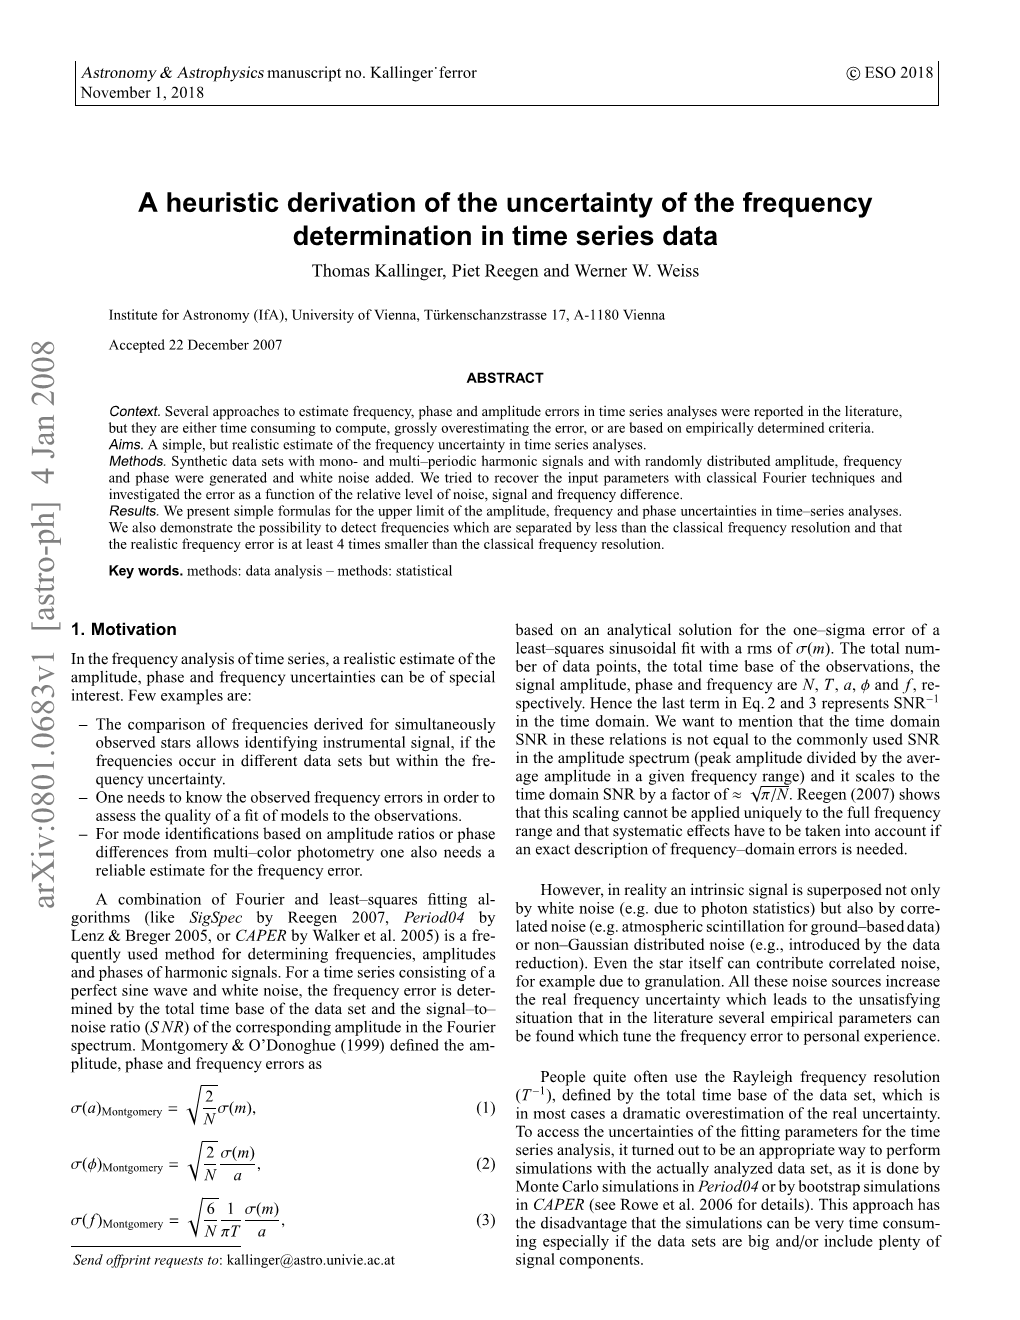 A Heuristic Derivation of the Uncertainty of the Frequency Determination in Time Series Data